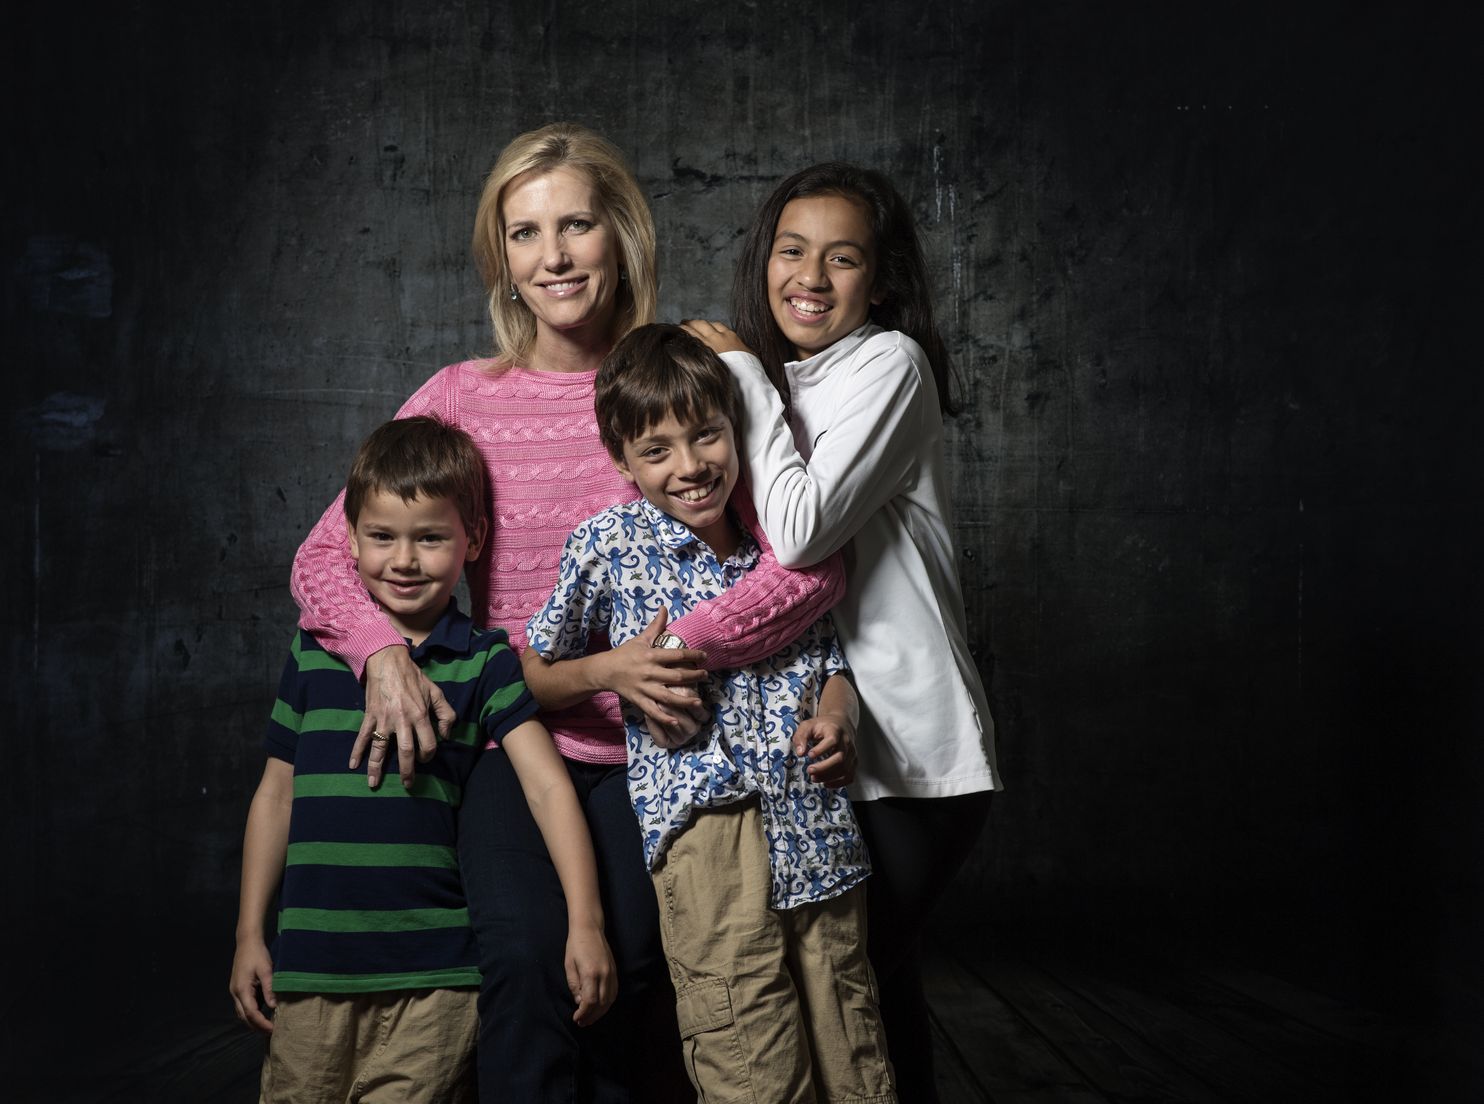 Laura Ingraham was ‘Trump before Trump.’ But is she made for TV? The